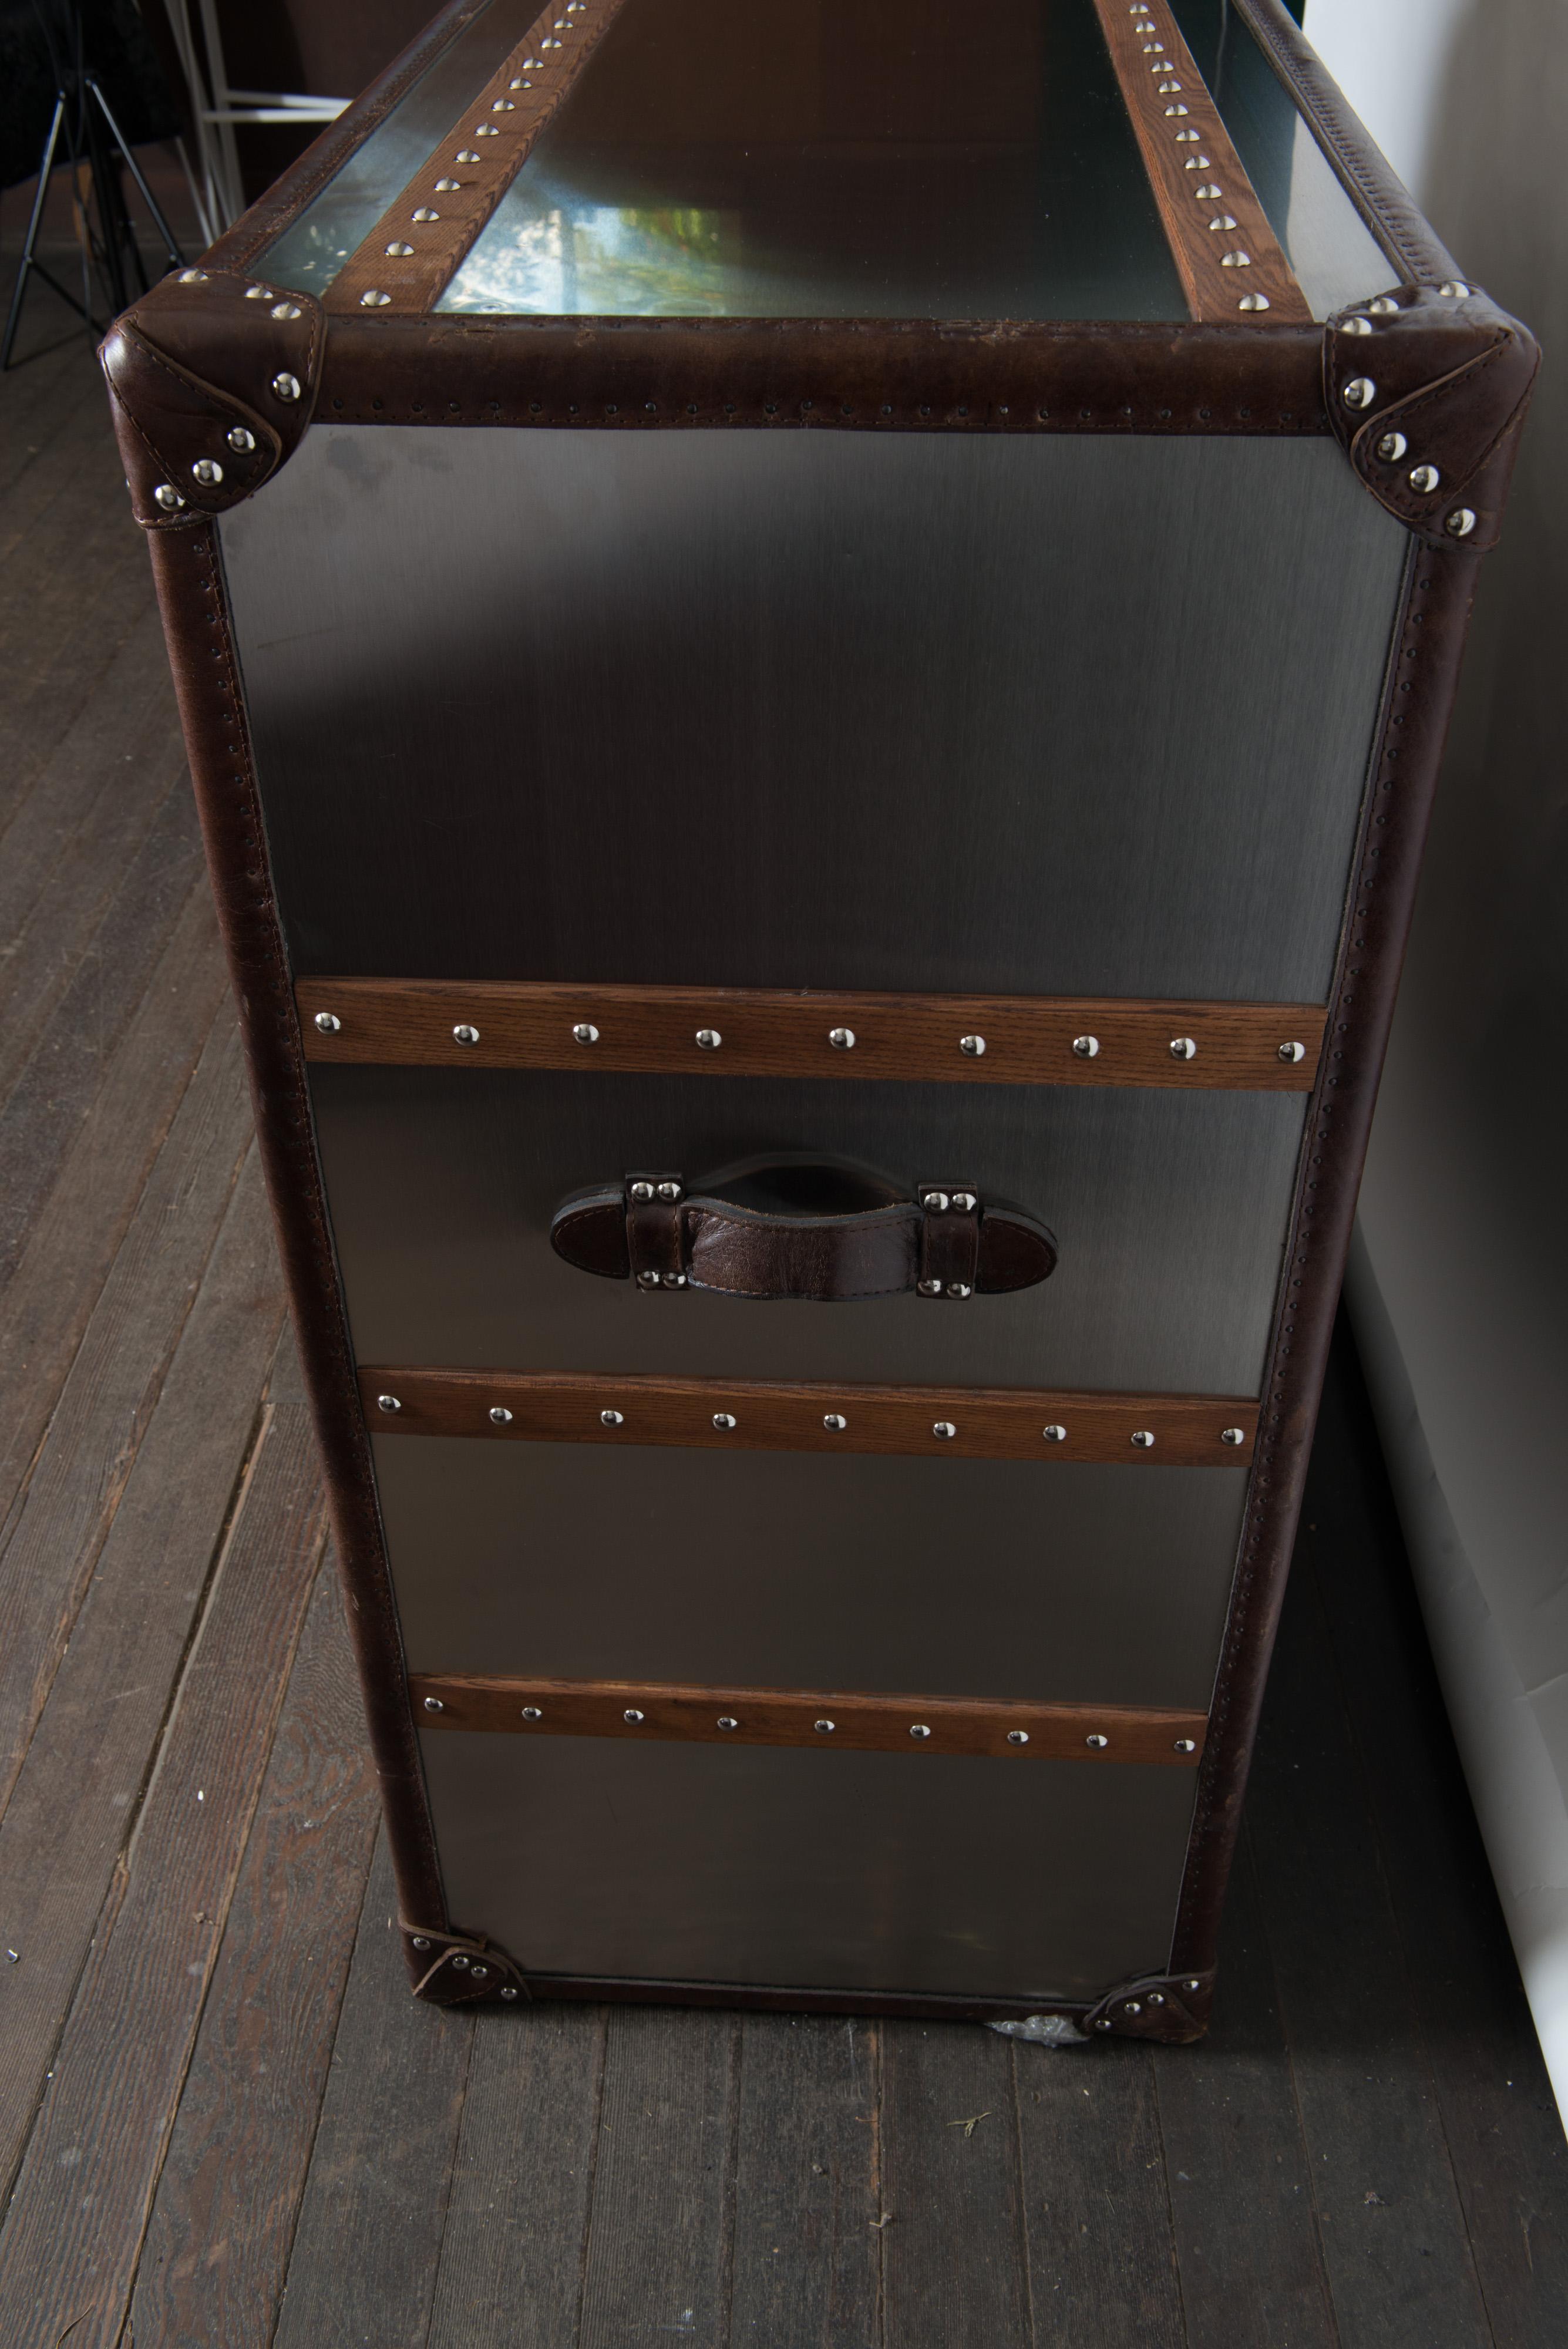 Italian Hermes style Stainless Steel, Leather, Wood Chest of Drawers